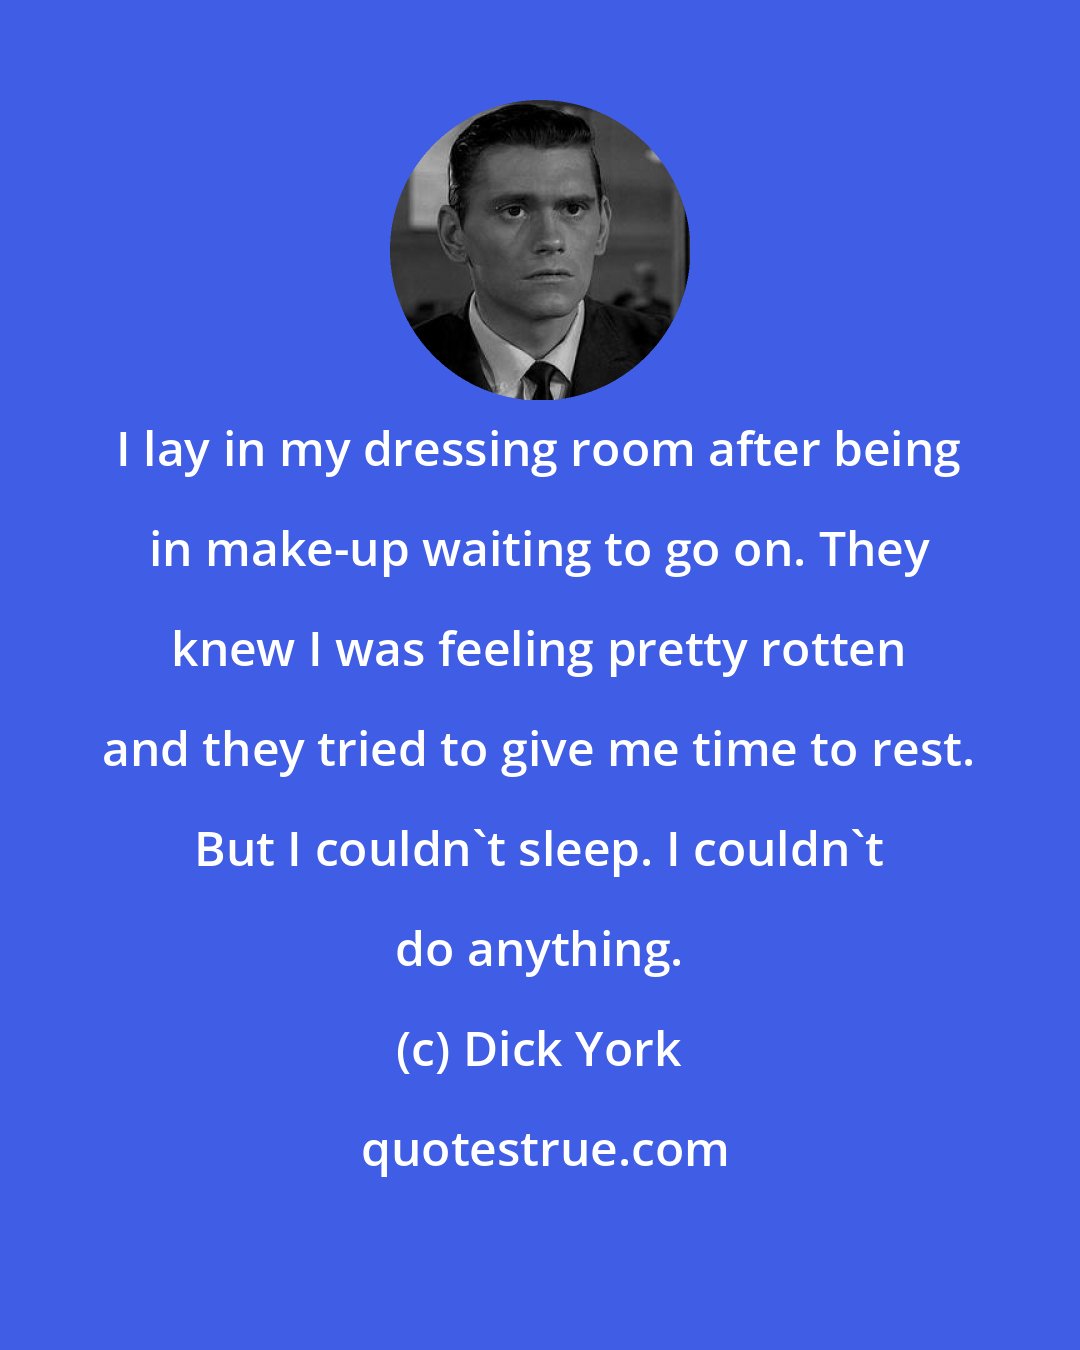 Dick York: I lay in my dressing room after being in make-up waiting to go on. They knew I was feeling pretty rotten and they tried to give me time to rest. But I couldn't sleep. I couldn't do anything.